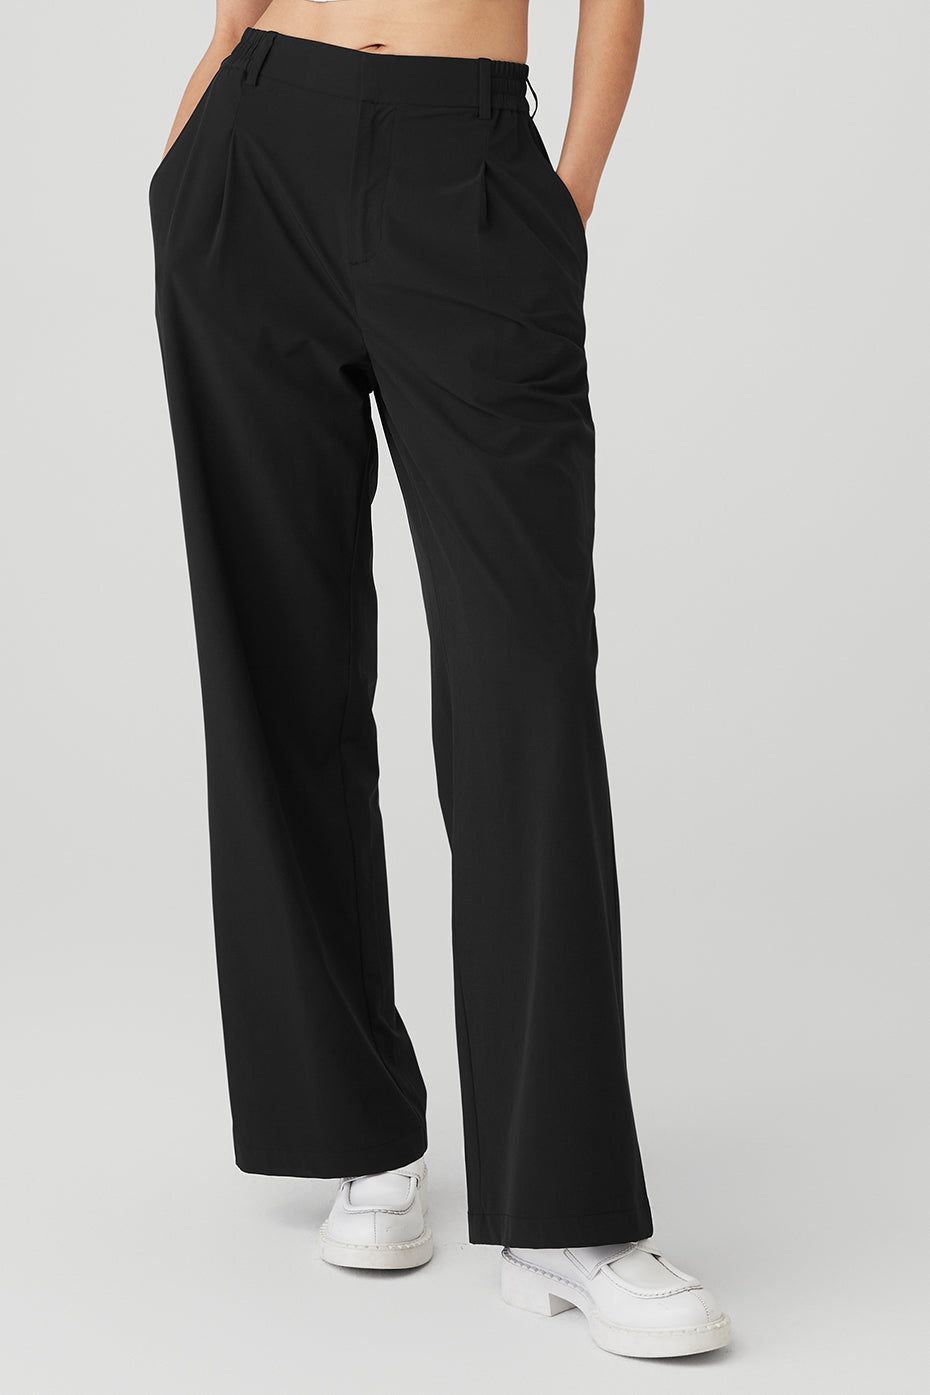 14 Black Work Pants for Women to Bring Style to the Office in 2023